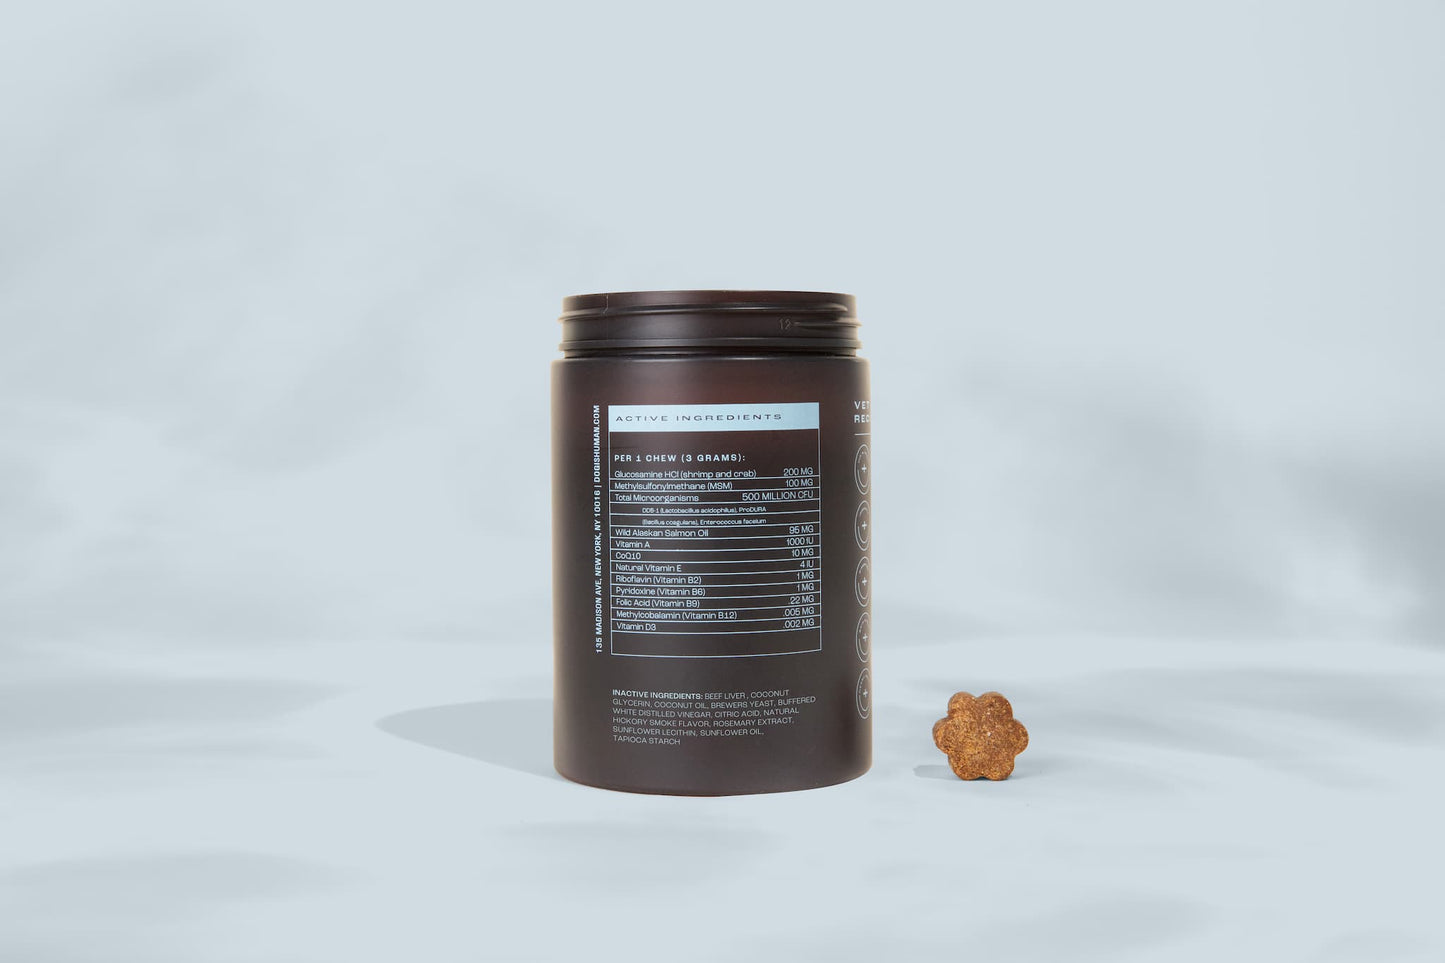 Alternate view of the jar showcasing the nutrition facts and ingredient lists.